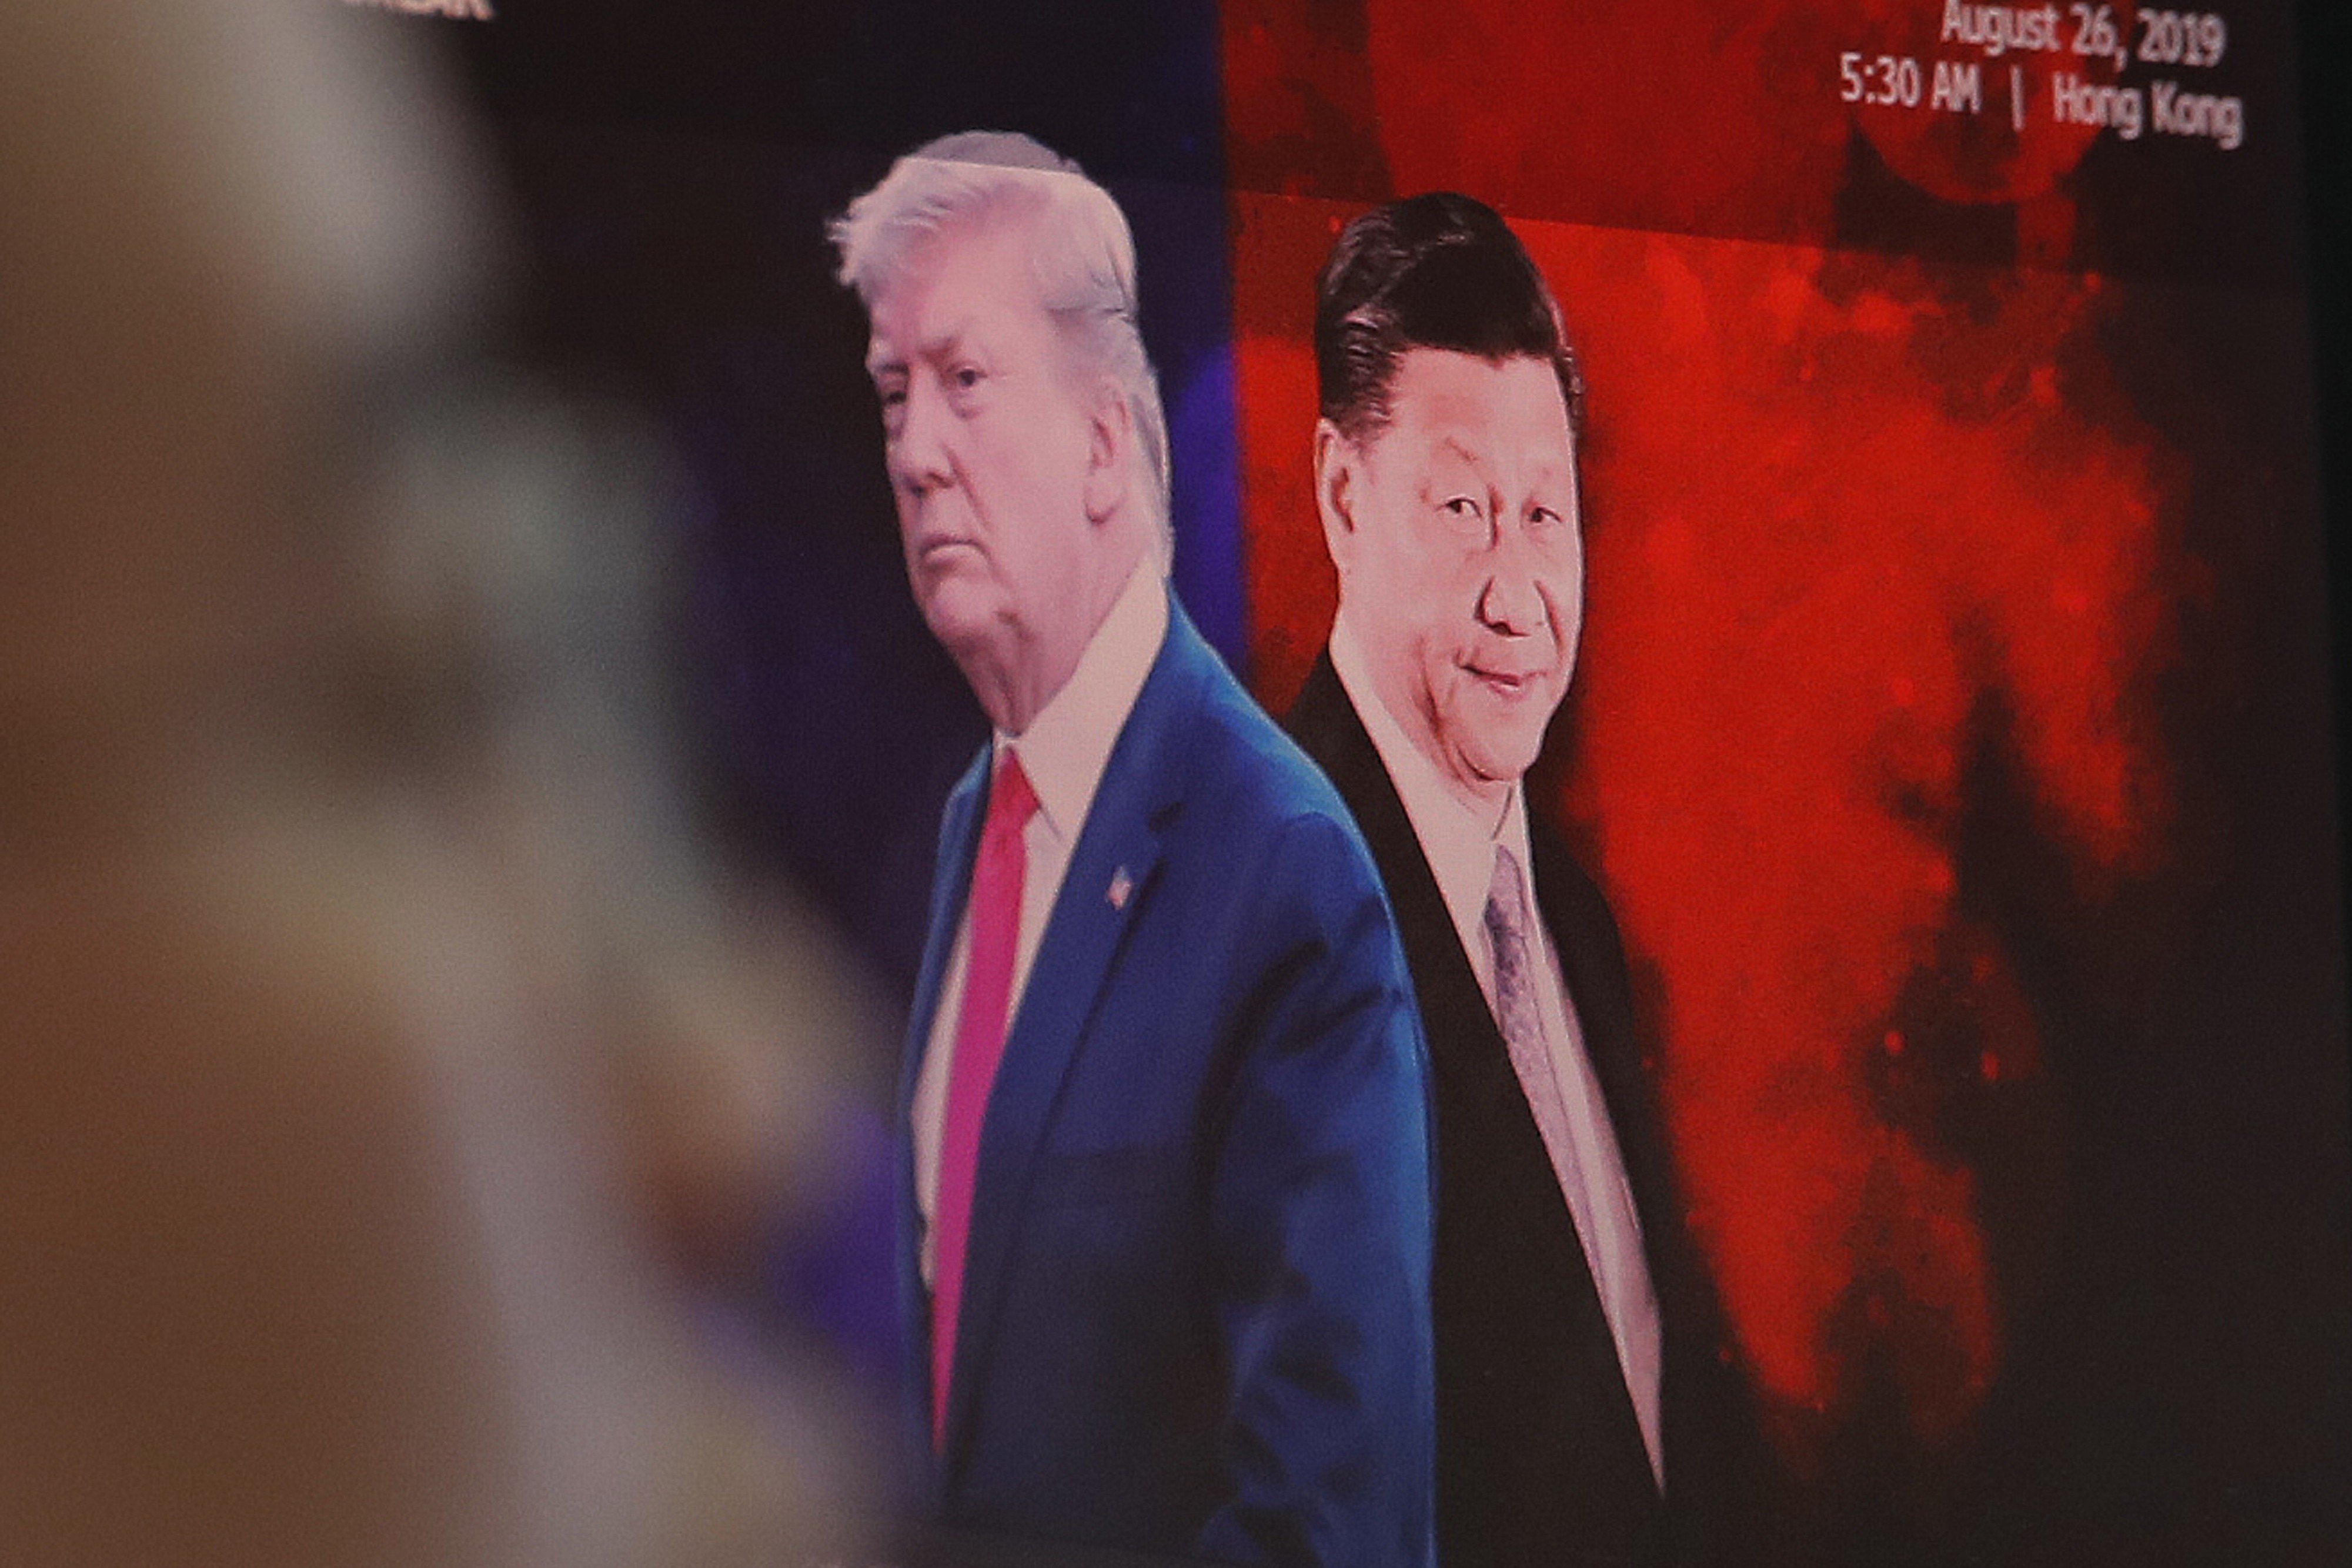 Images of US President Donald Trump and Chinese President Xi Jinping on the computer screen of a currency trader at a bank in Seoul, South Korea, on August 26. Asian shares tumbled on that day, after the latest escalation in the US-China trade war renewed uncertainties about global economies. Photo: AP